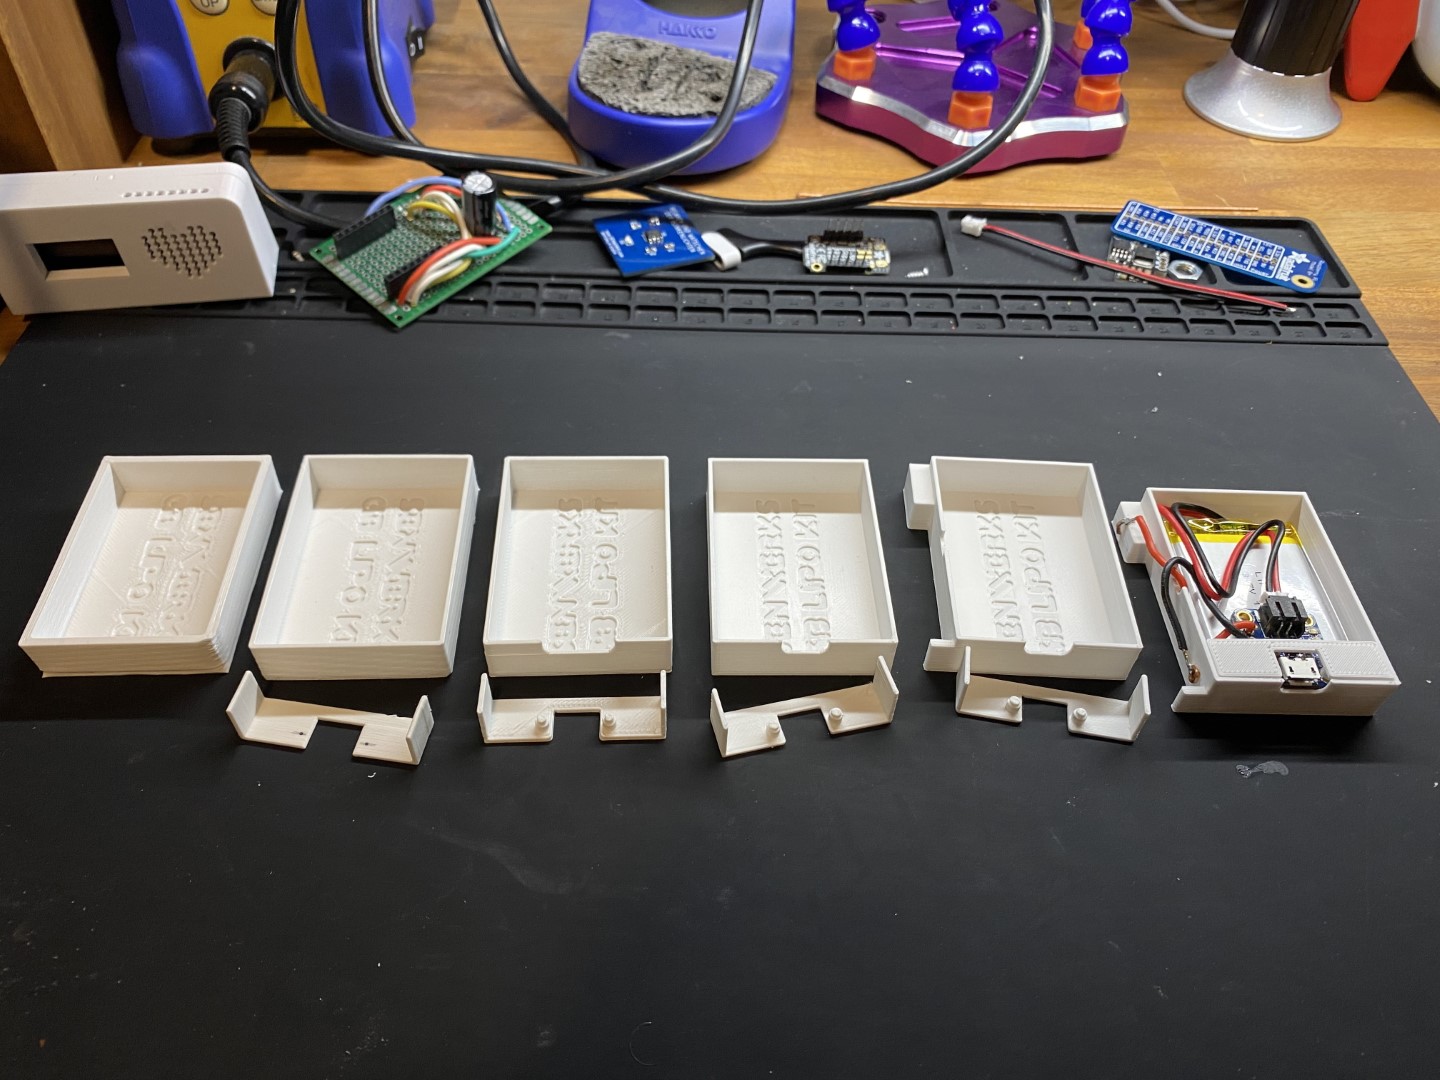 Gameboy LiPo Battery case iterations